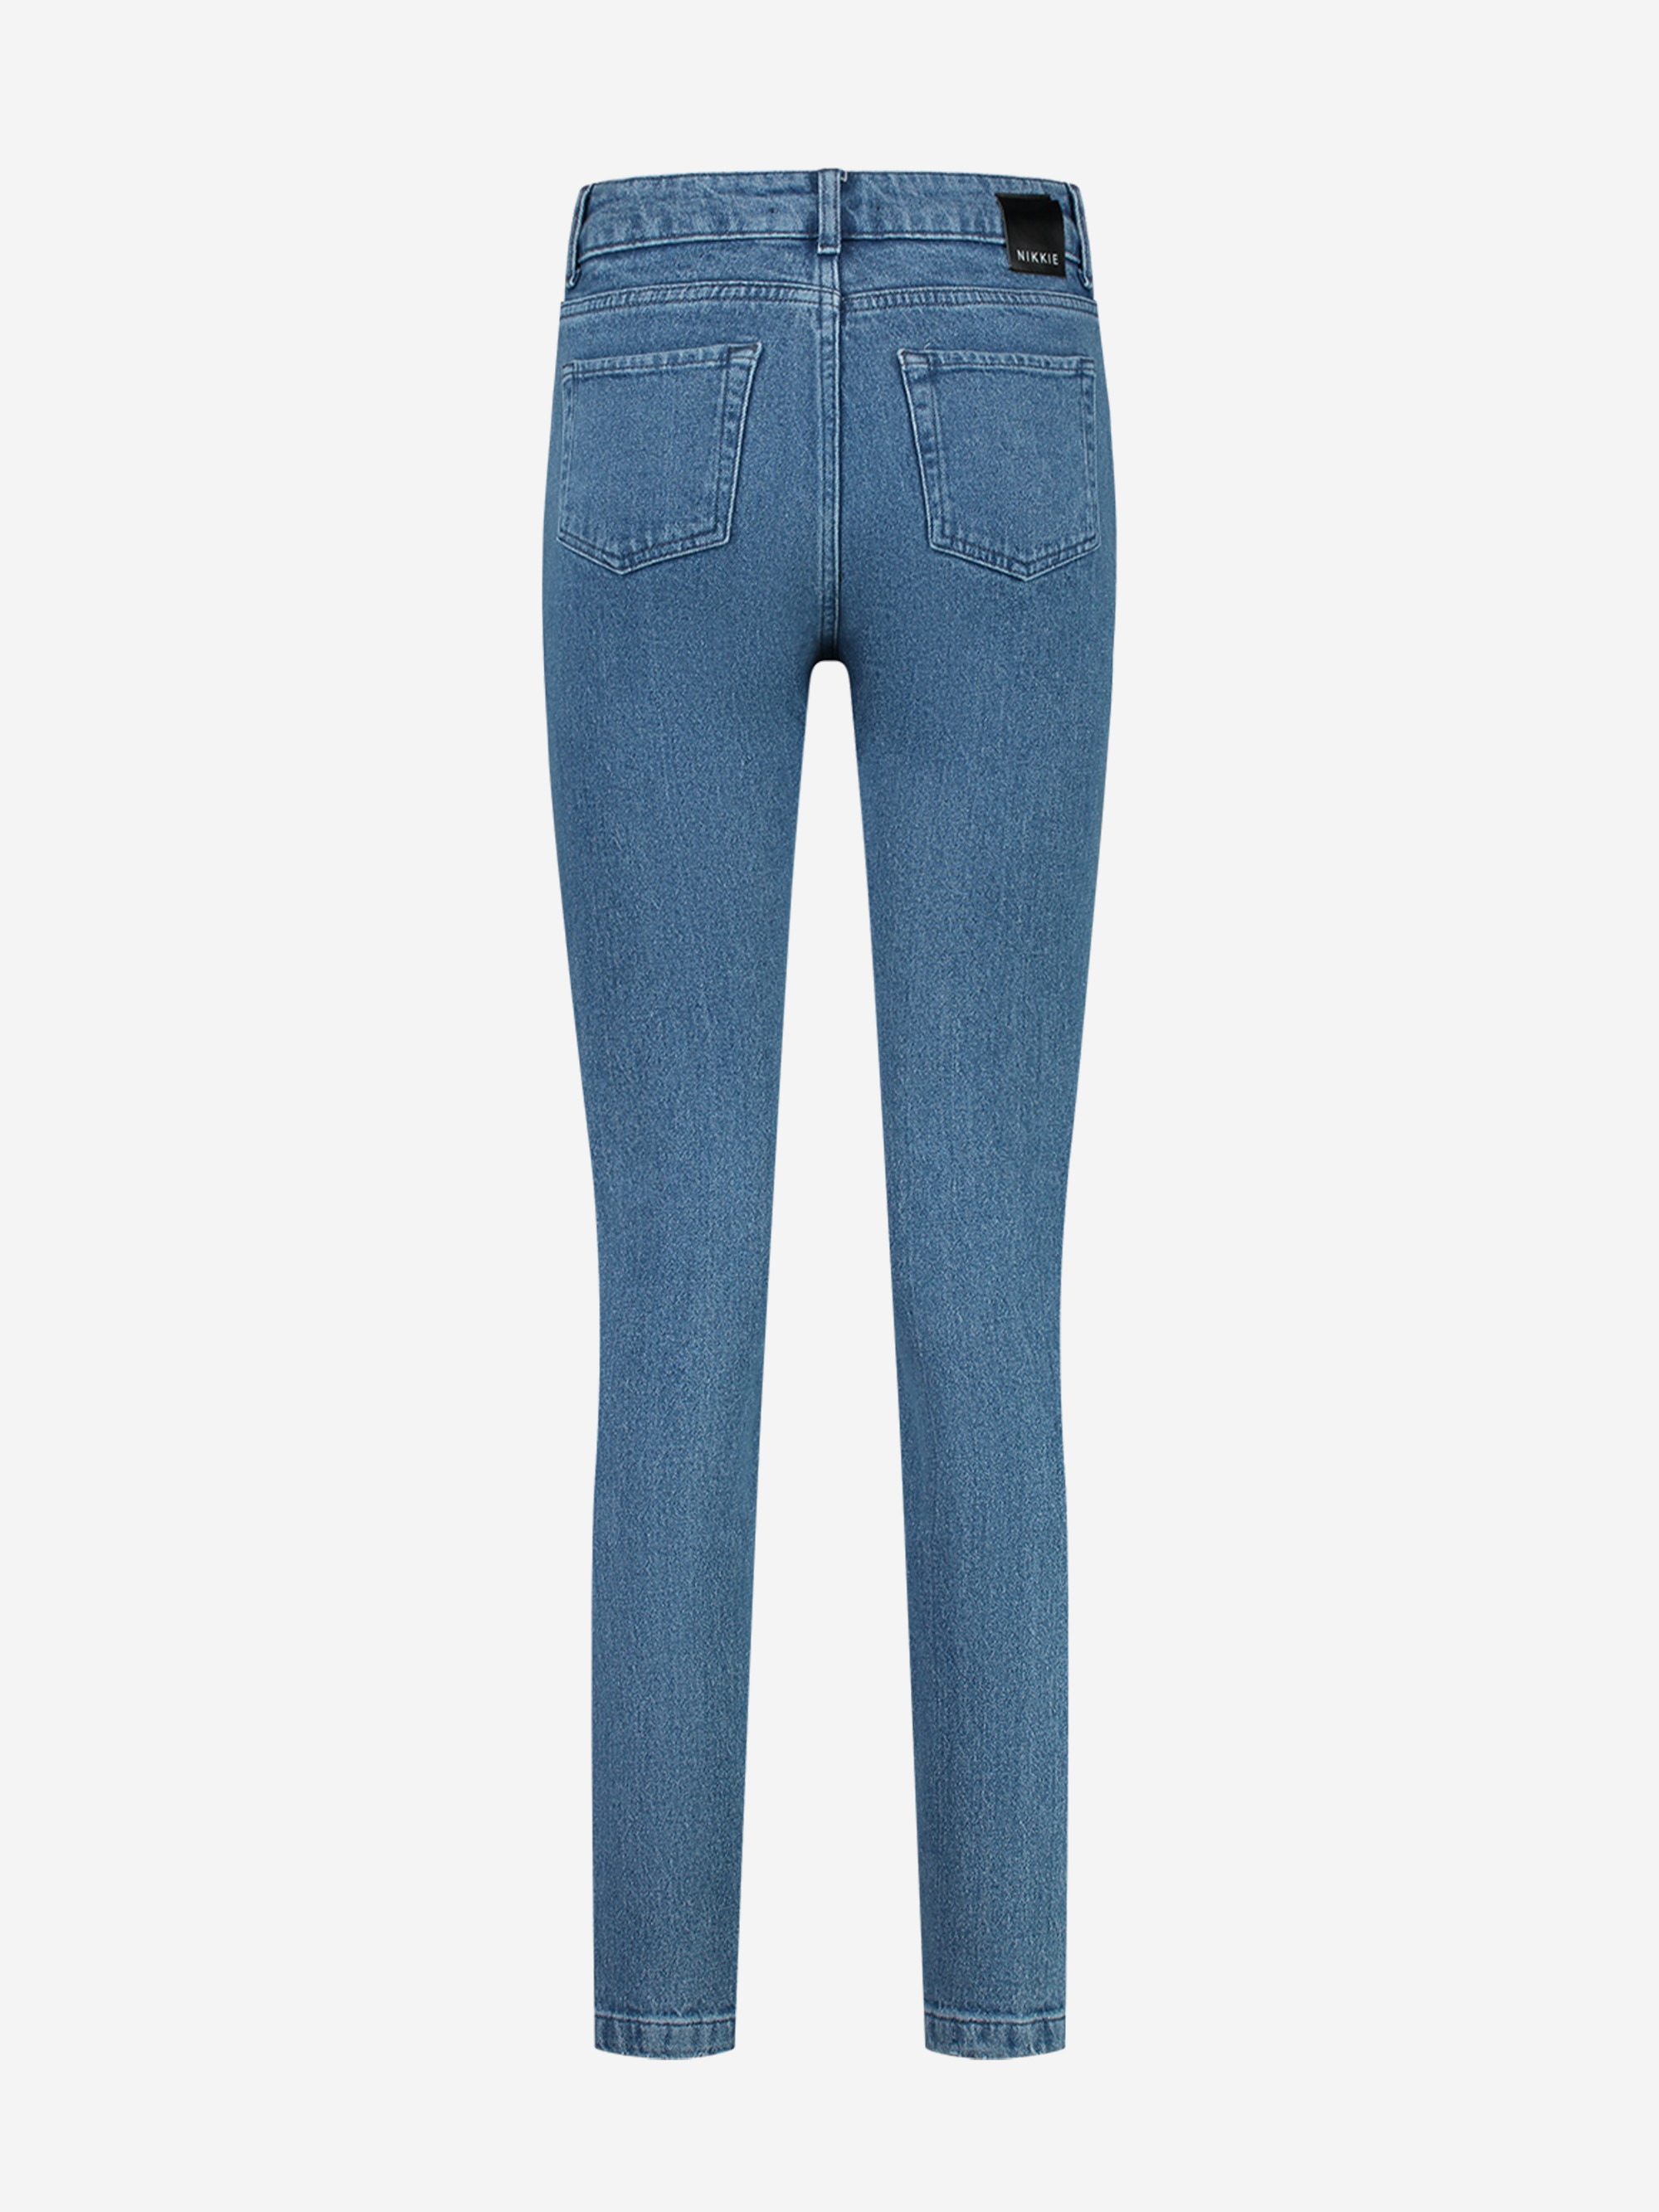 Skinny jeans with line detail